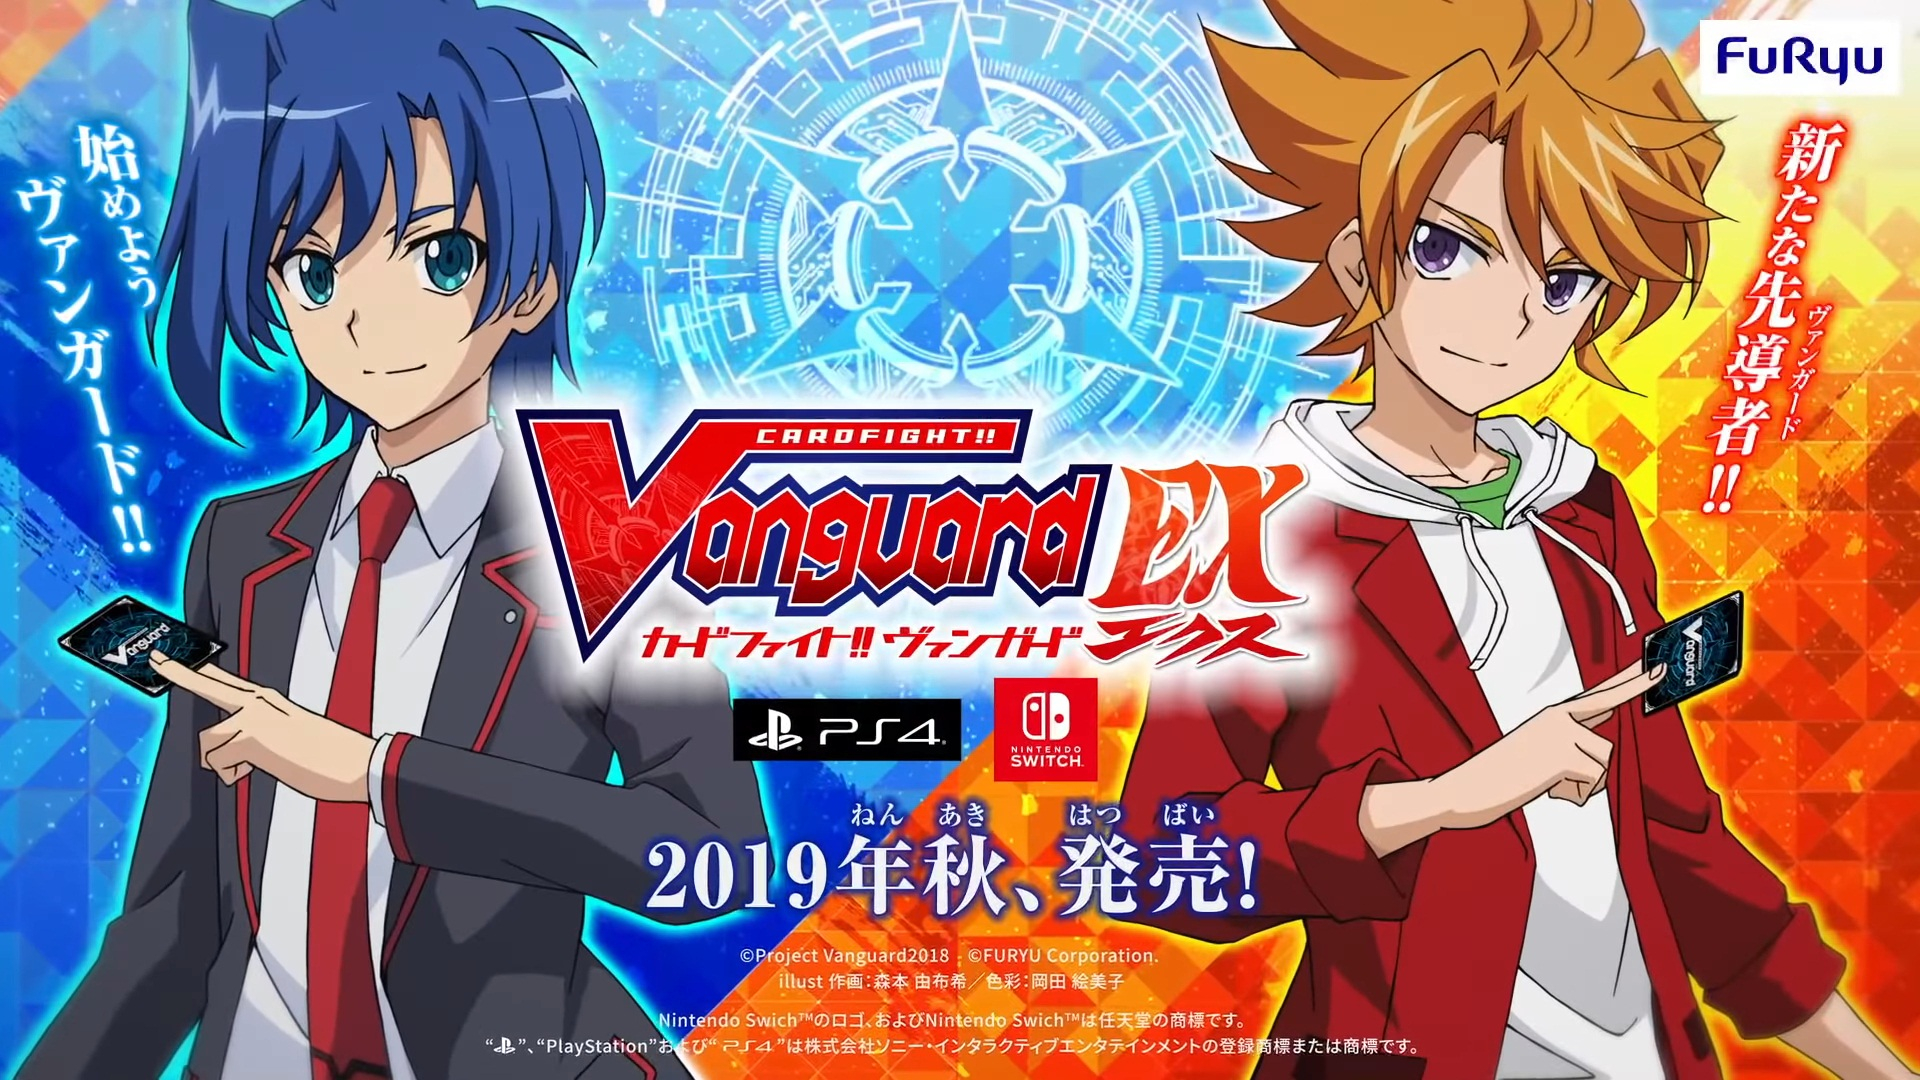 Cardfight Vanguard Ex Announced By Furyu For Ps4, Switch - Cardfight Vanguard Nintendo Switch , HD Wallpaper & Backgrounds